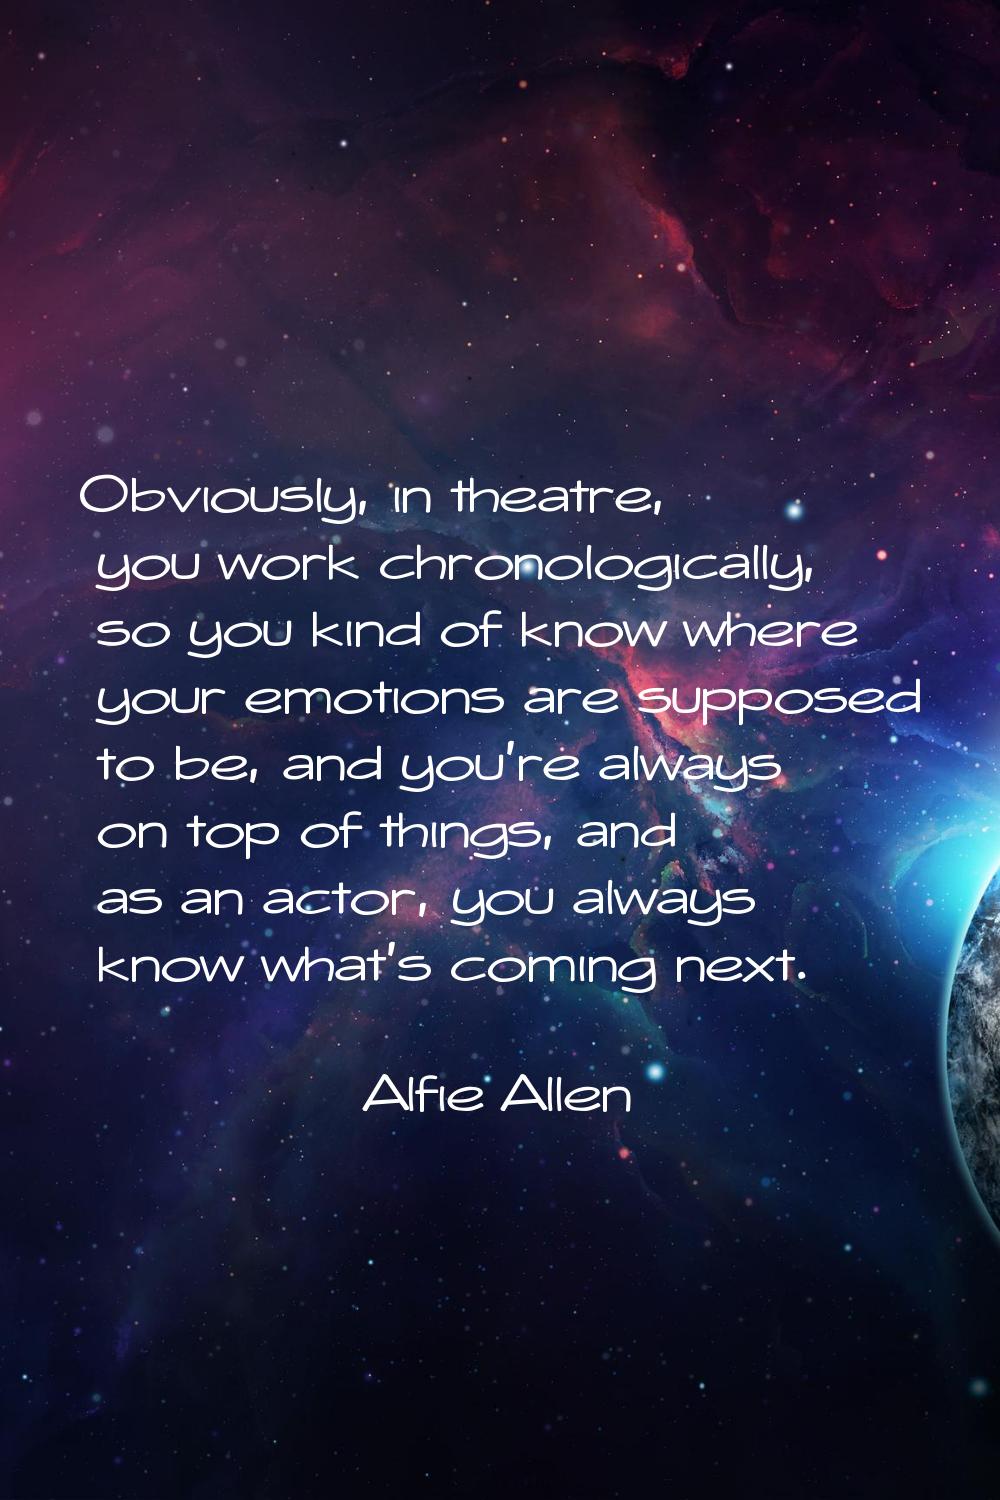 Obviously, in theatre, you work chronologically, so you kind of know where your emotions are suppos